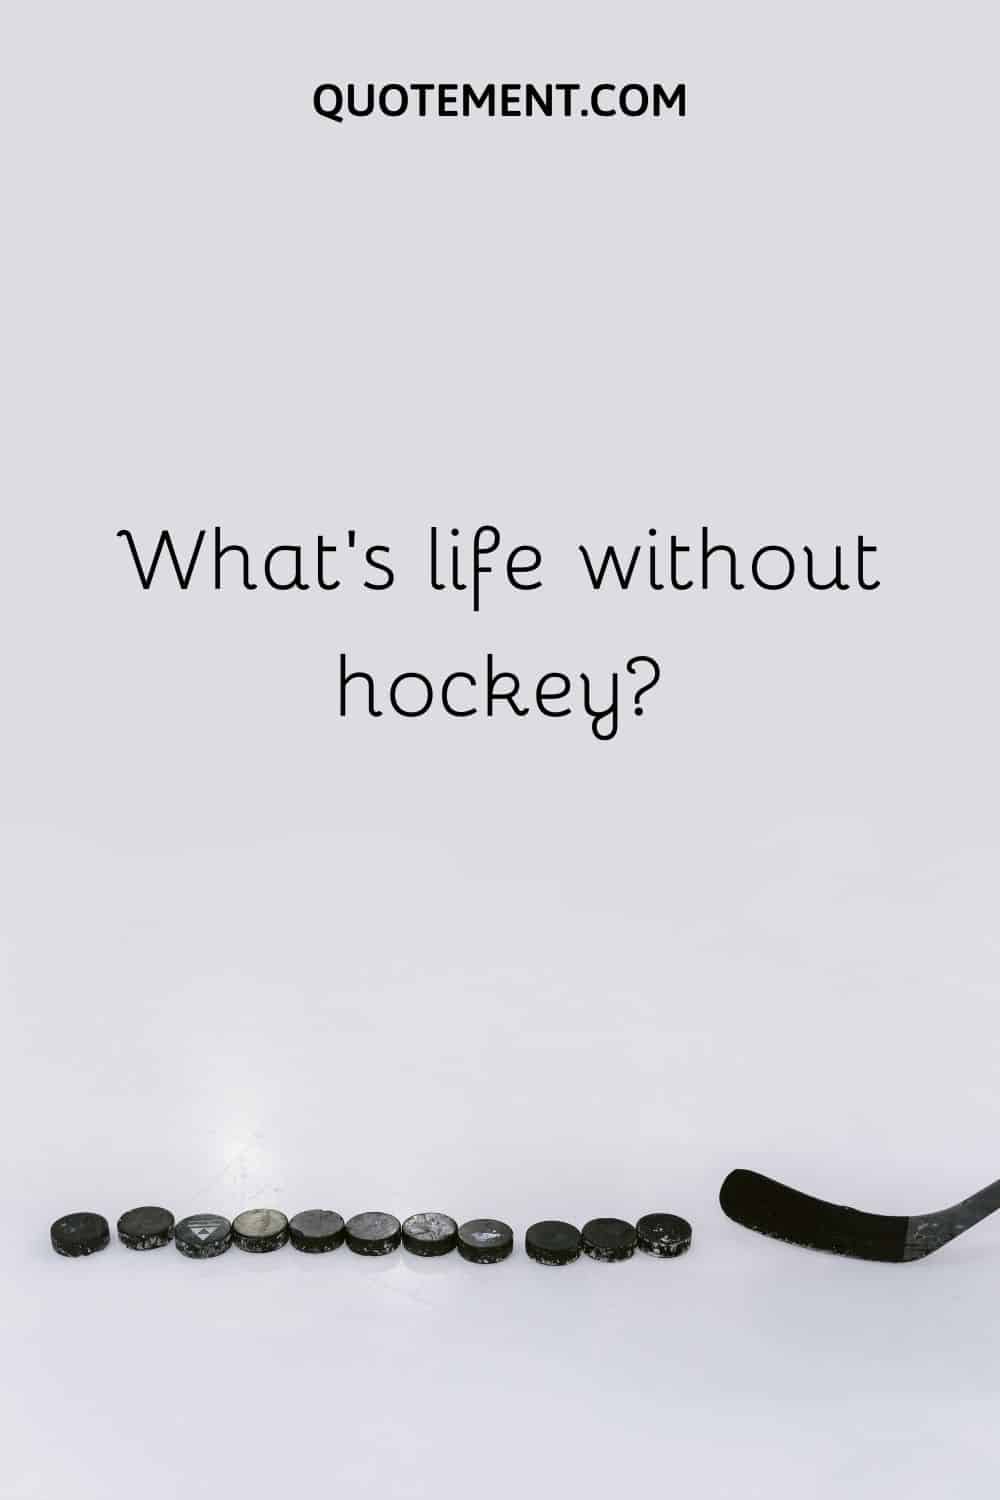 What’s life without hockey